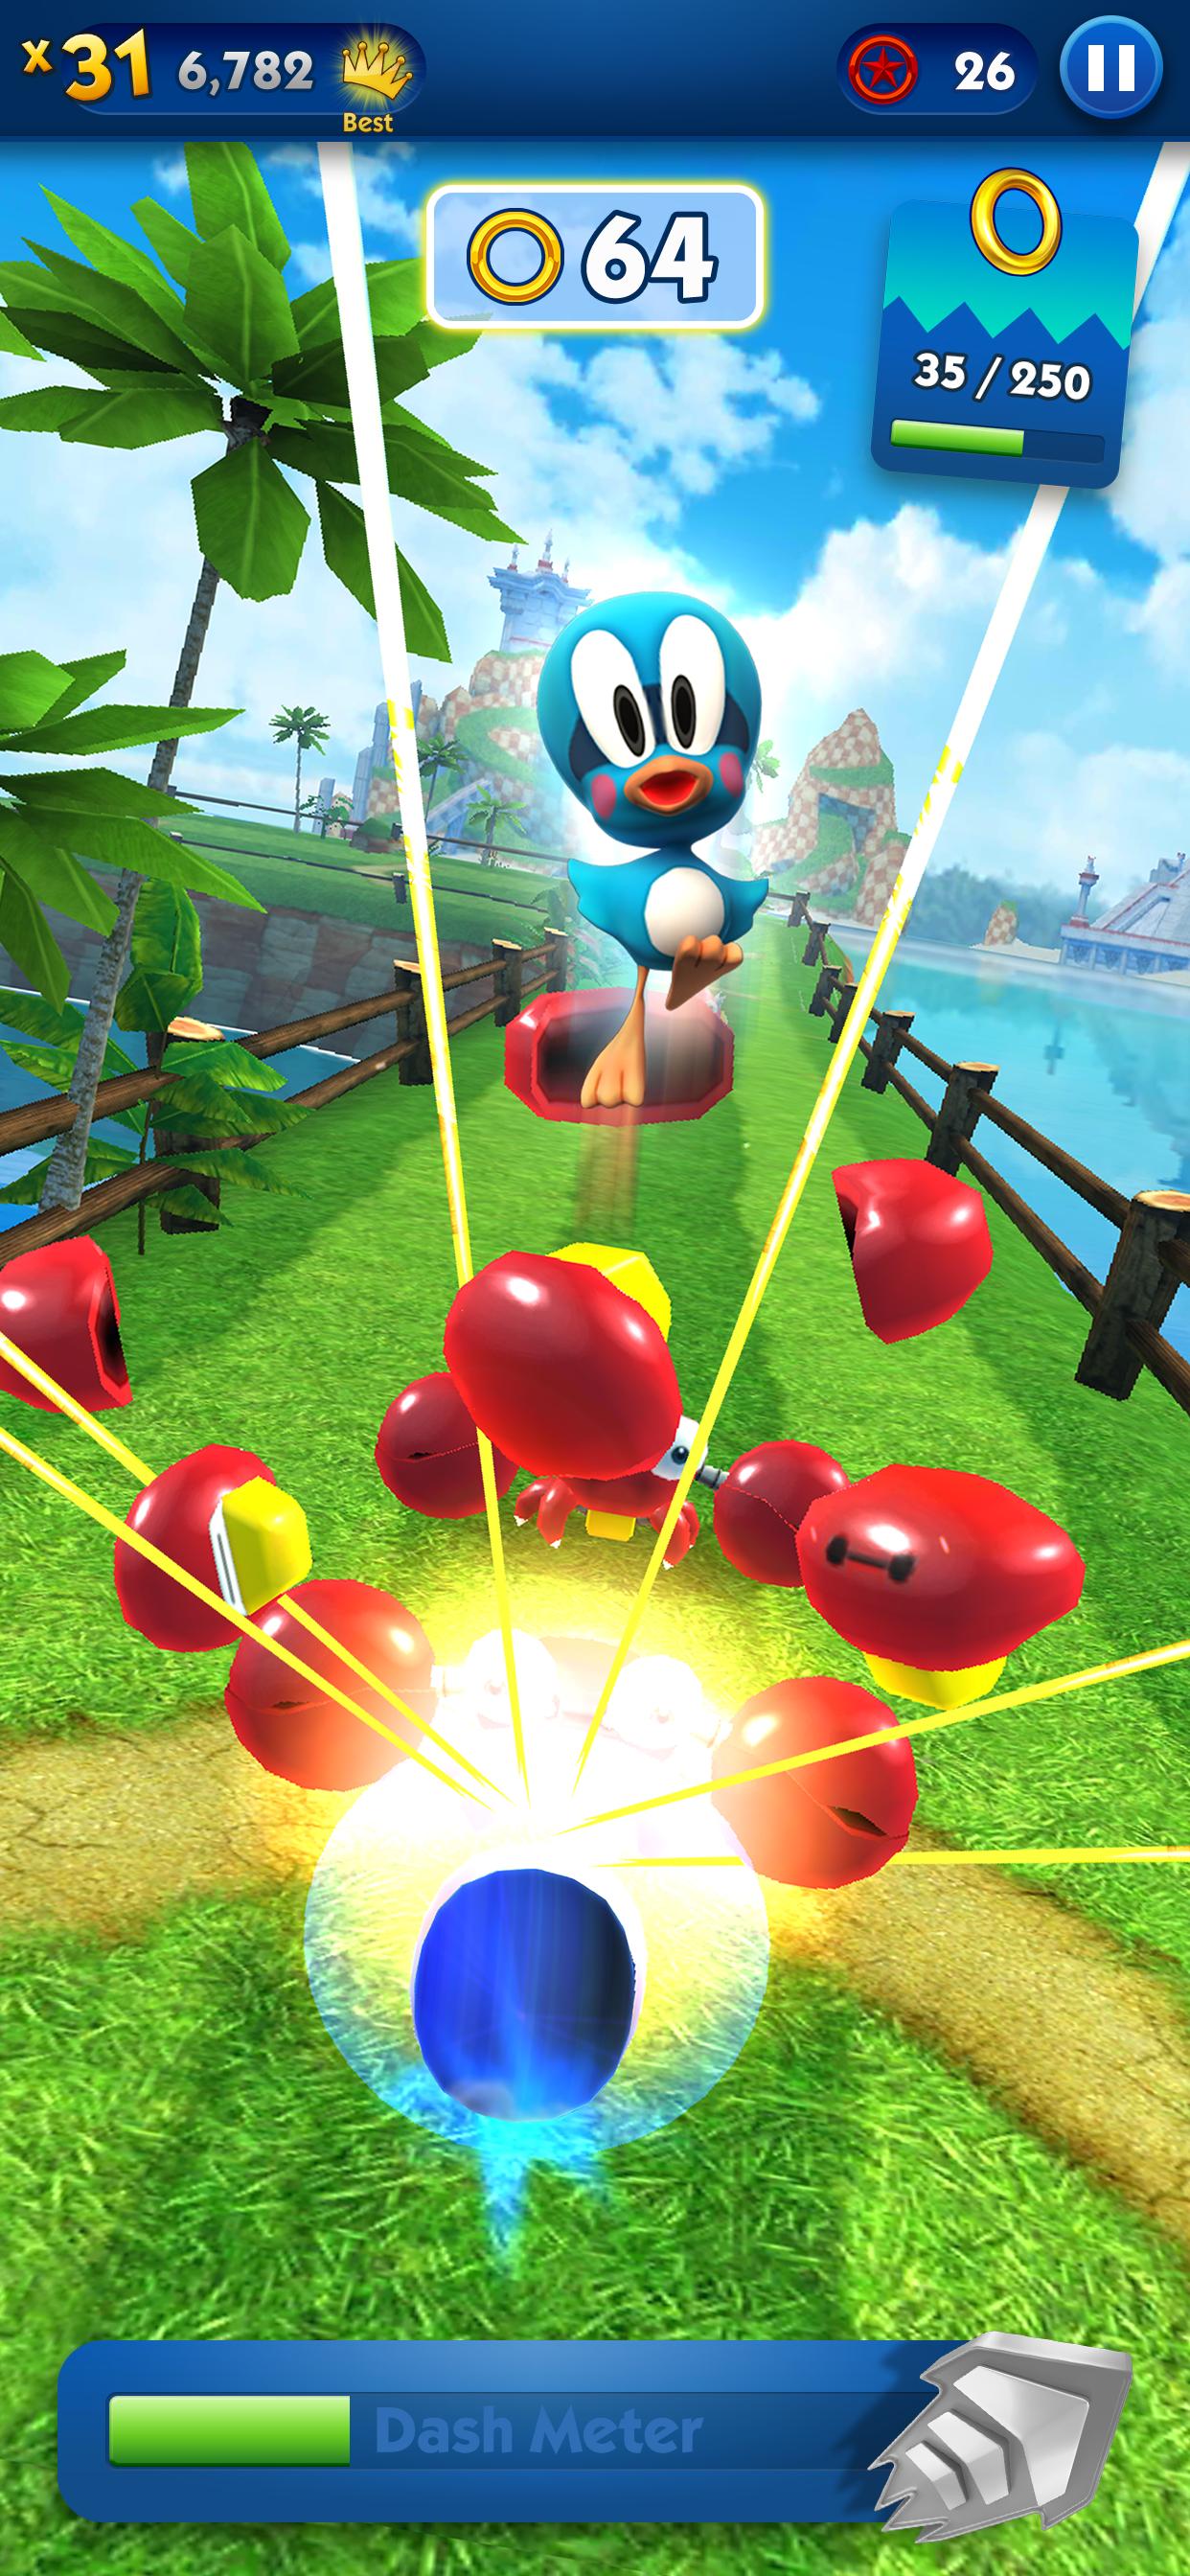 Sonic Dash - لعبة الجري for Android - APK Download